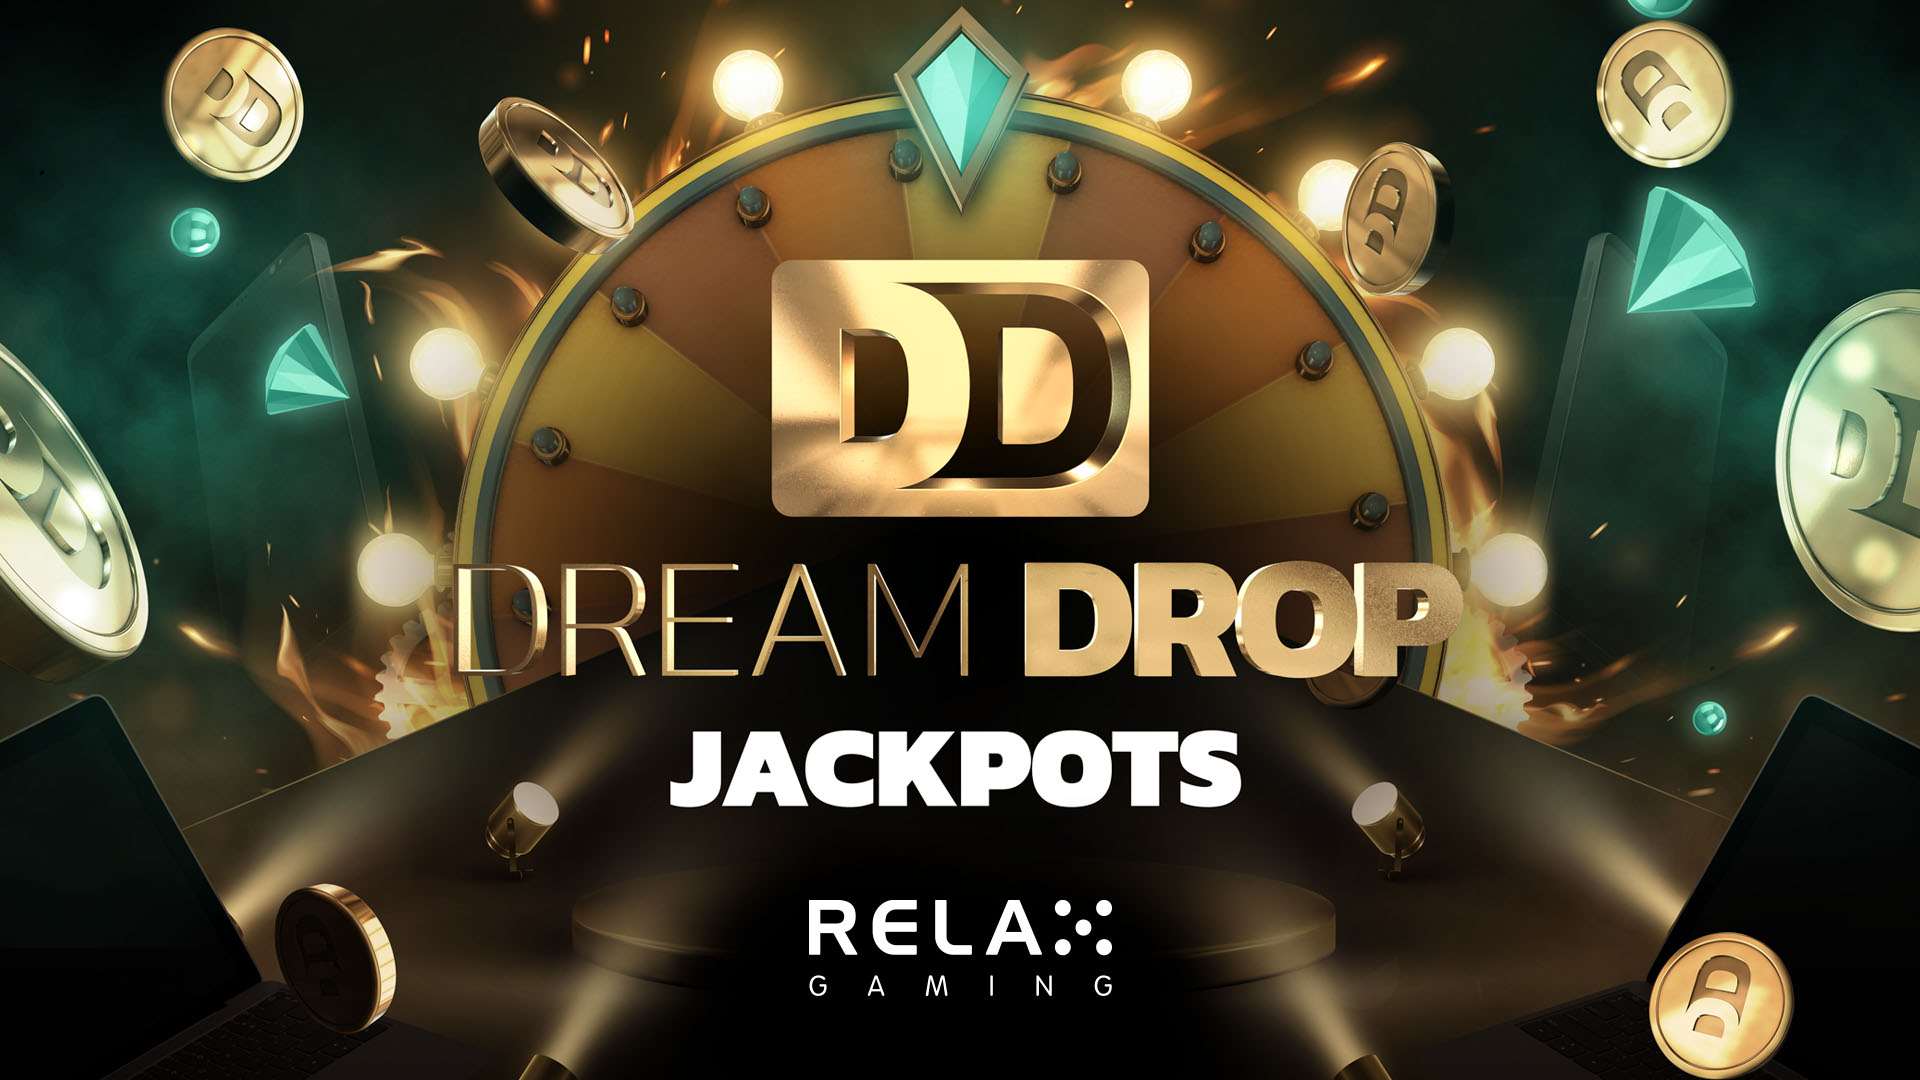 About Relax Gaming's Dream Drop Jackpots